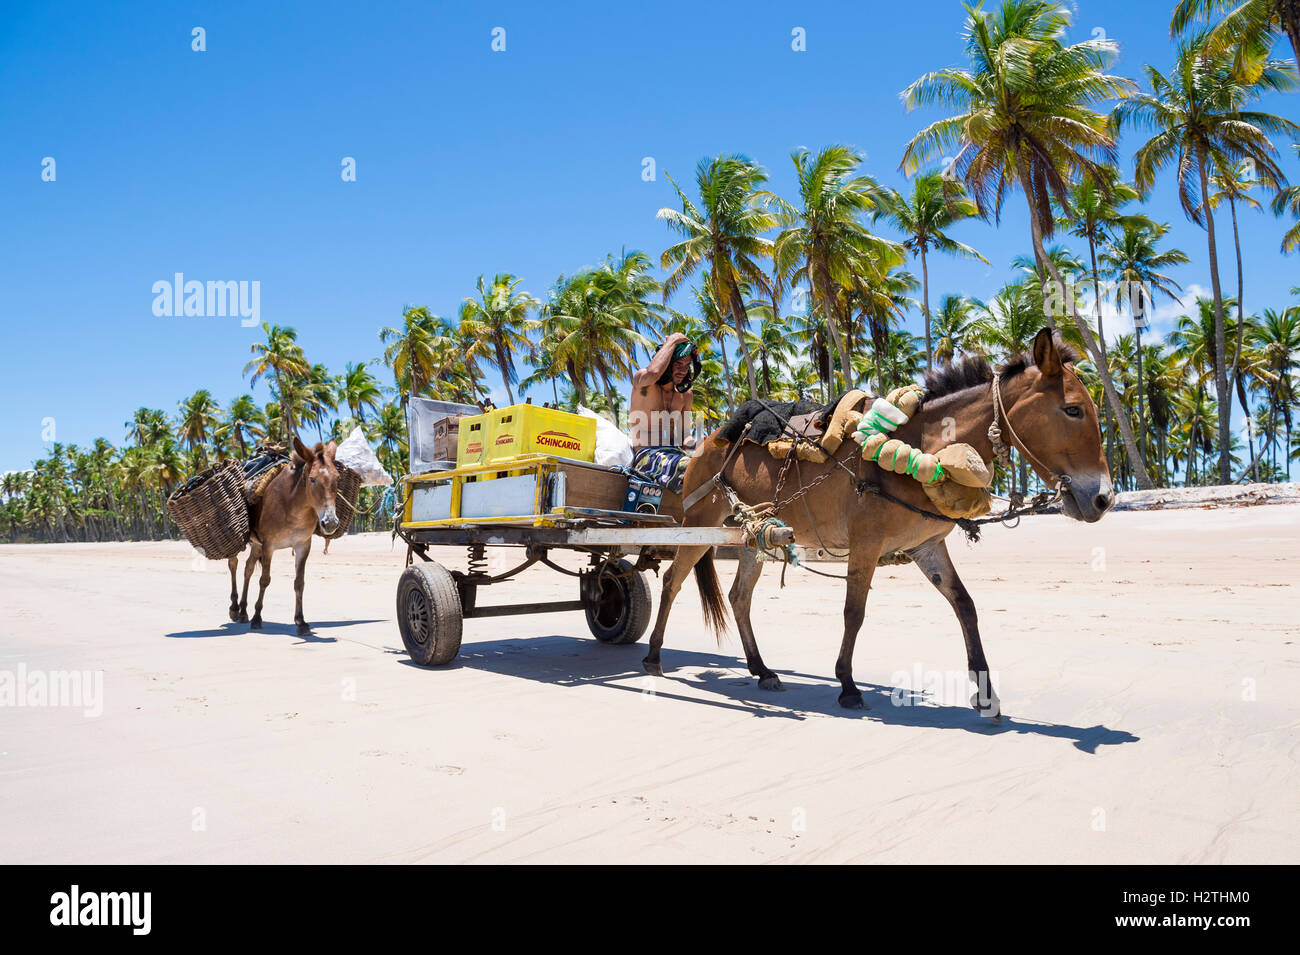 BAHIA, BRAZIL - FEBRUARY 6, 2016: Brazilian man rides a cart with two working donkeys passing on the beach of a remote island. Stock Photo